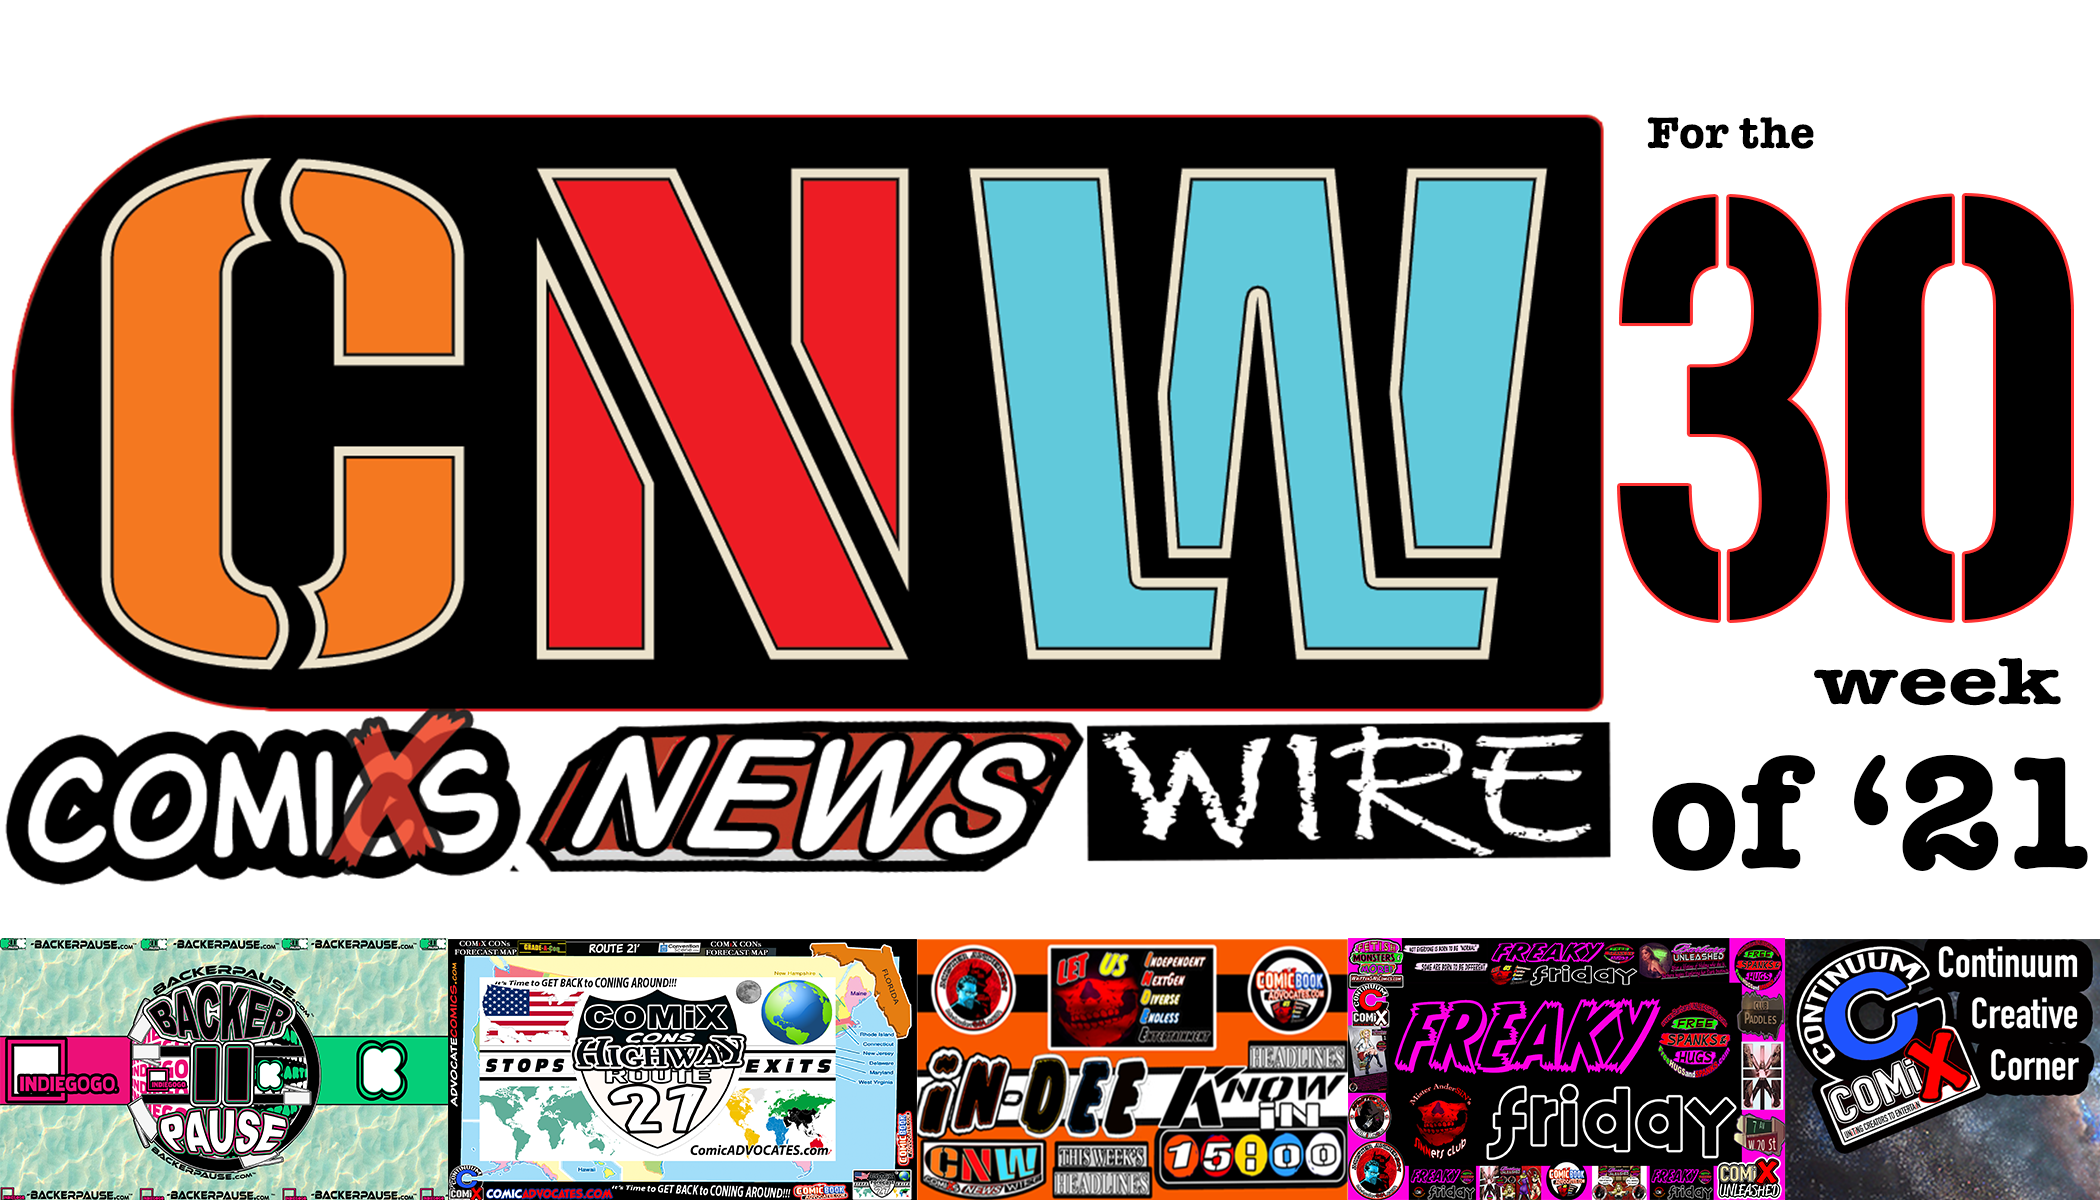 Week 30 of 21′-This Week in COMiX STREAMS from THE COMiX NEWS WiRE.